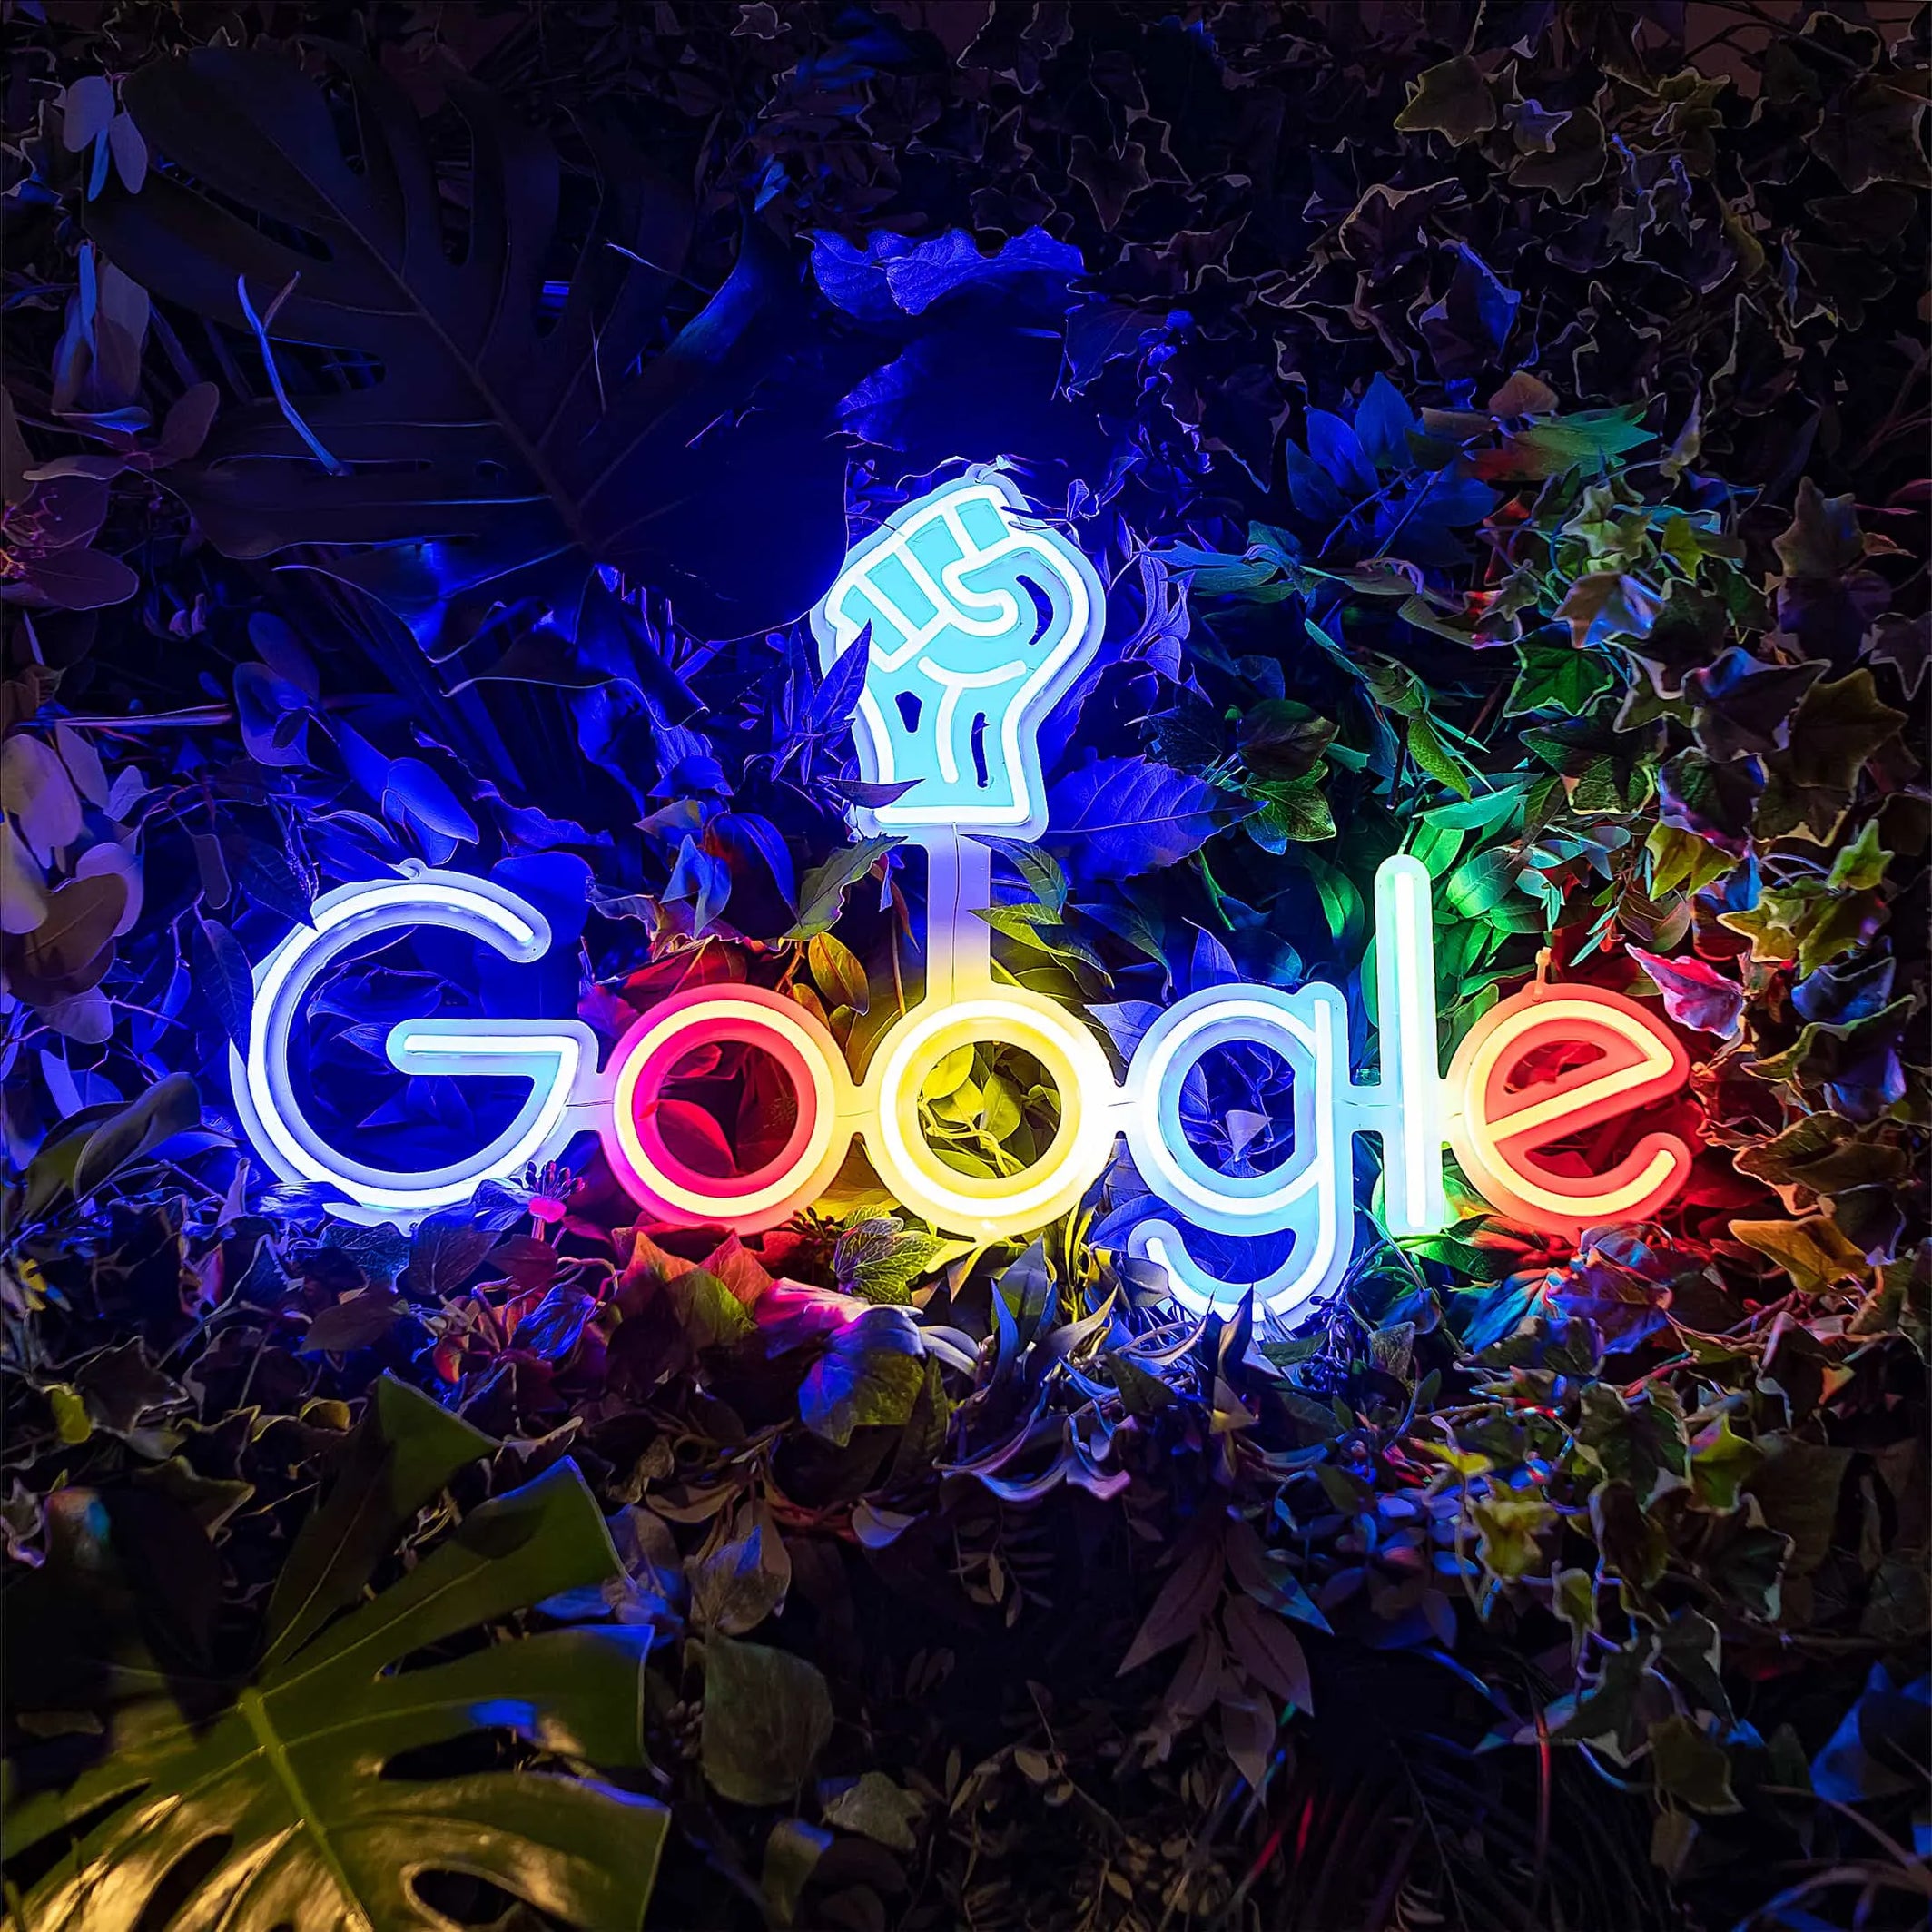 Vibrant close-up of Amaranté London's floral arrangement at Google, showcasing a variety of green shades and textures, highlighted by a glowing Google logo